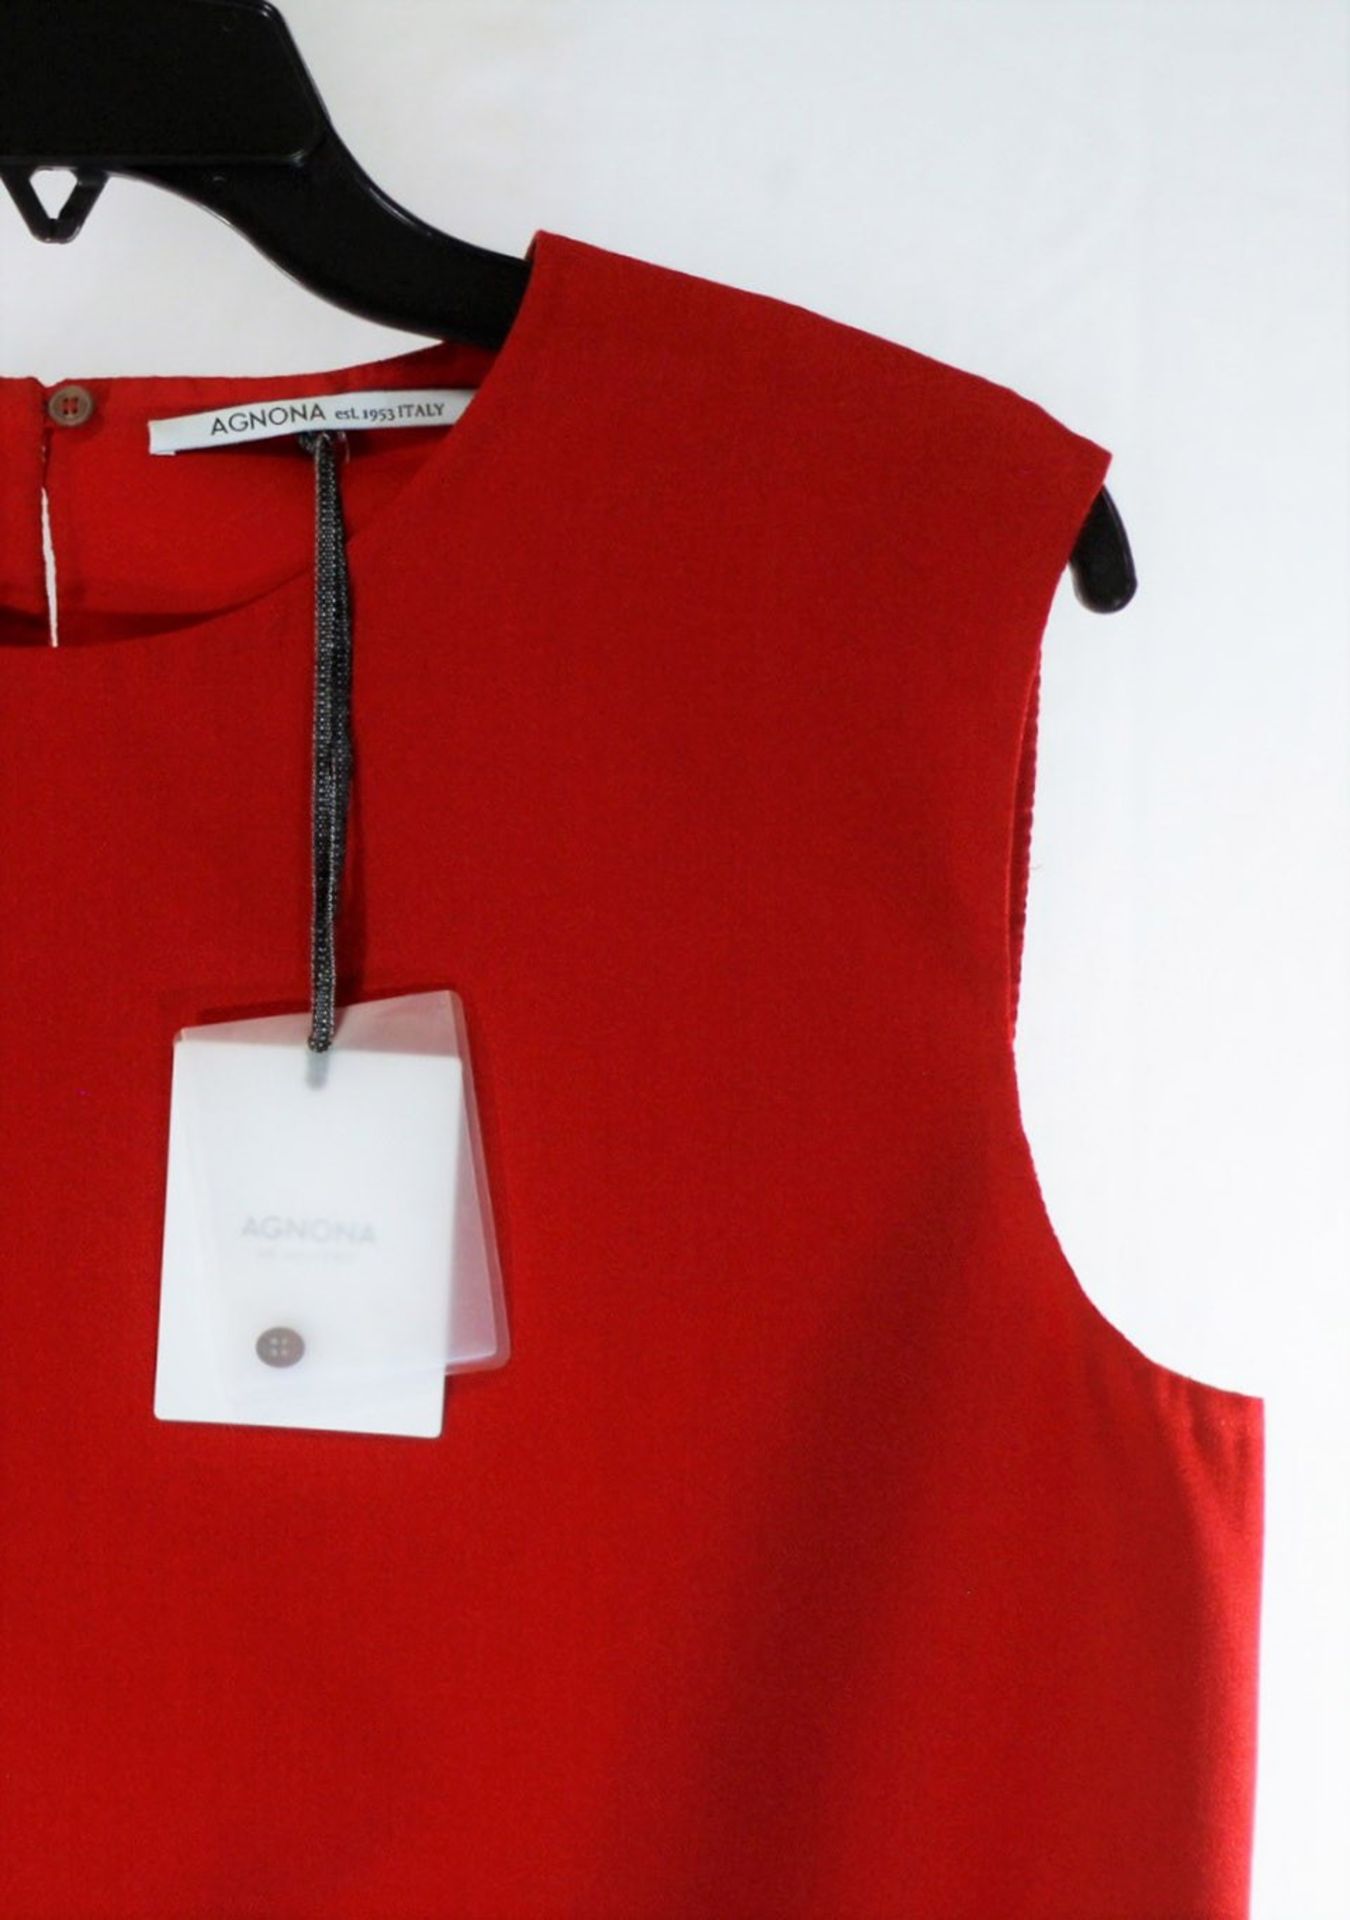 1 x Agnona Red Vest - Size: 18 - Material: 50% Cotton, 28% Mohair, 18% Silk, 4% Wool. Details 55% - Image 8 of 8